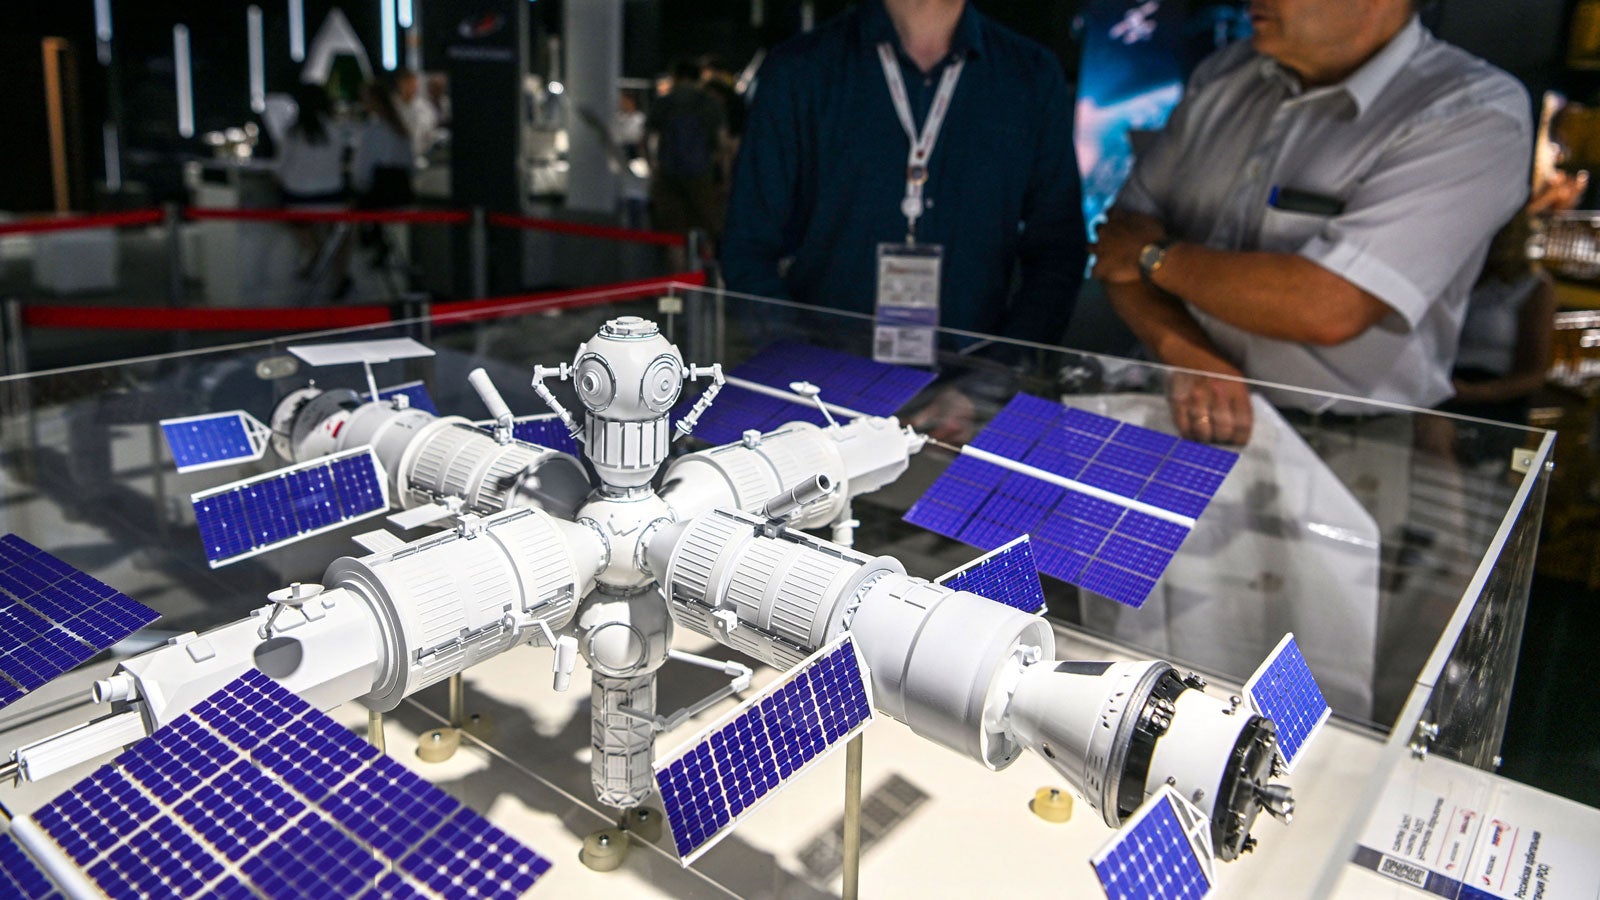 Russia’s Next Space Station: This is it